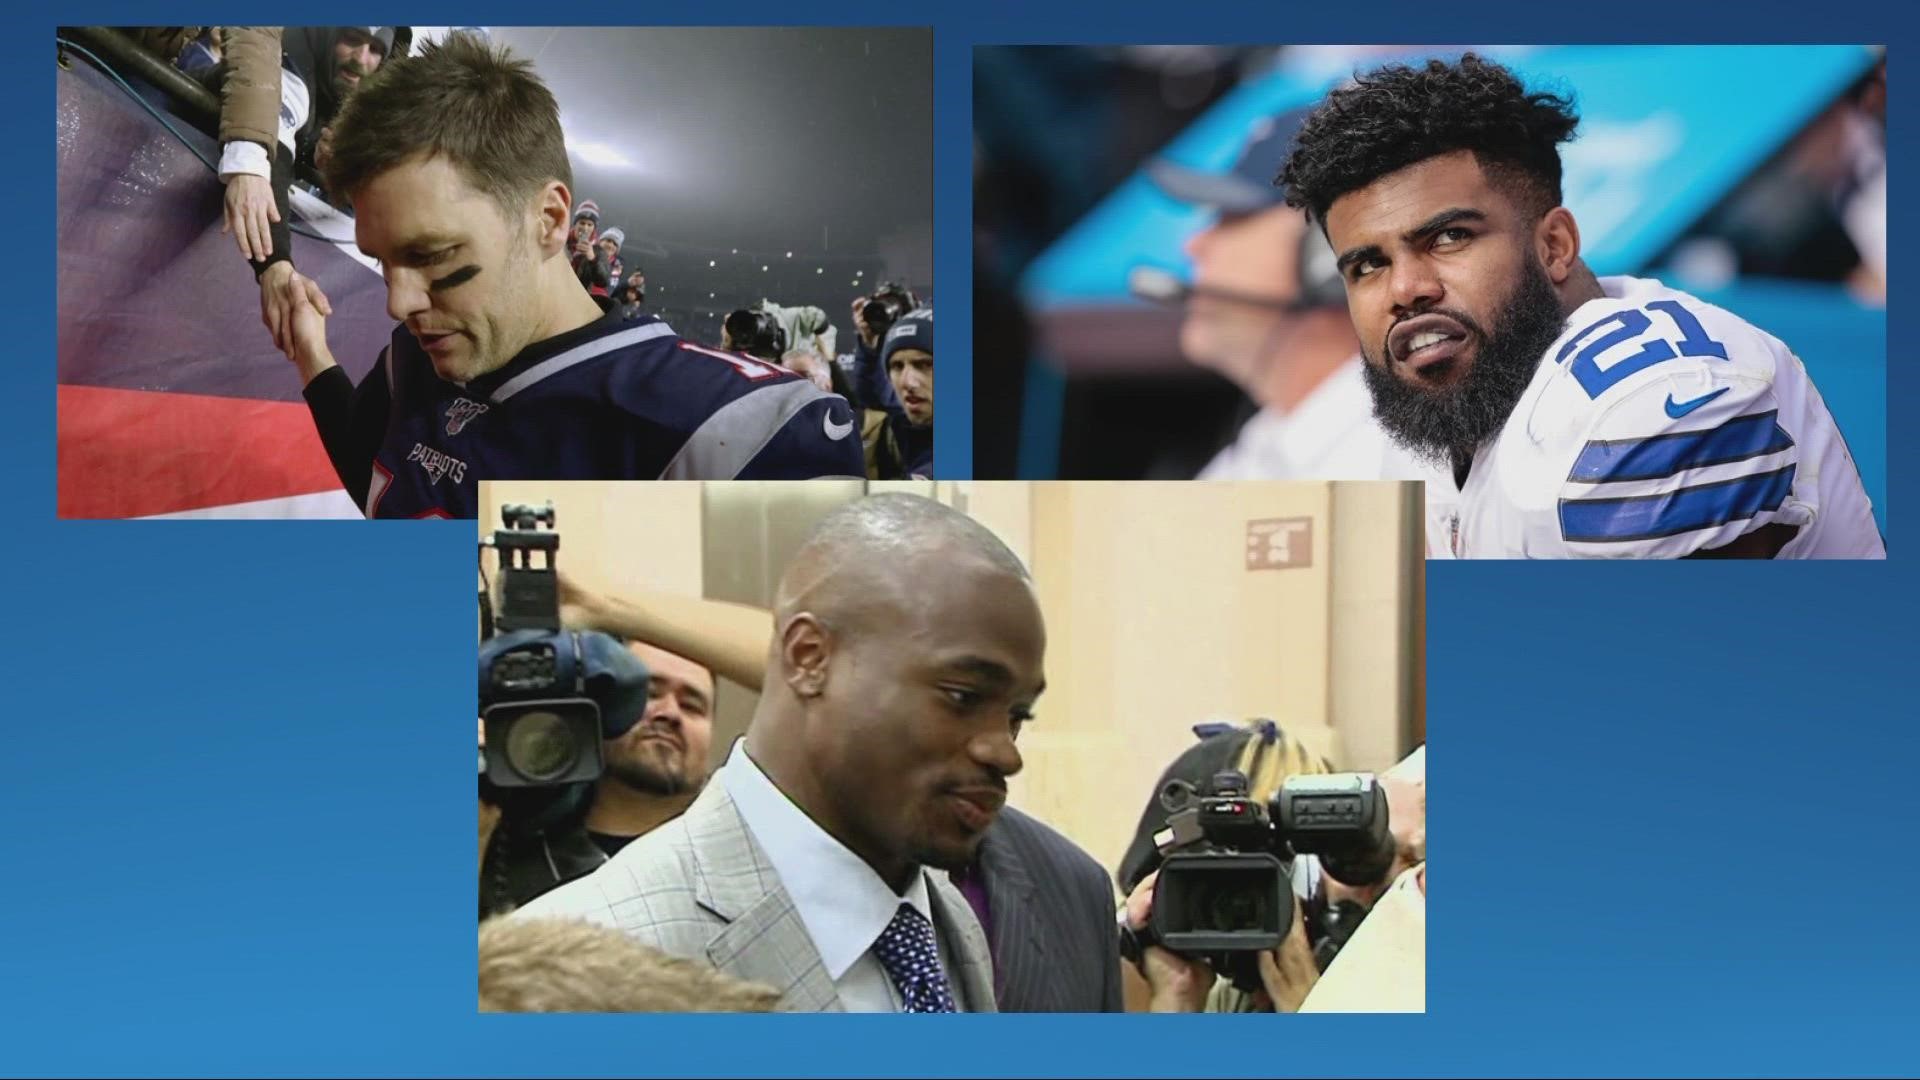 3News Investigates takes a deeper dive into past cases when the NFL was sued by star players.